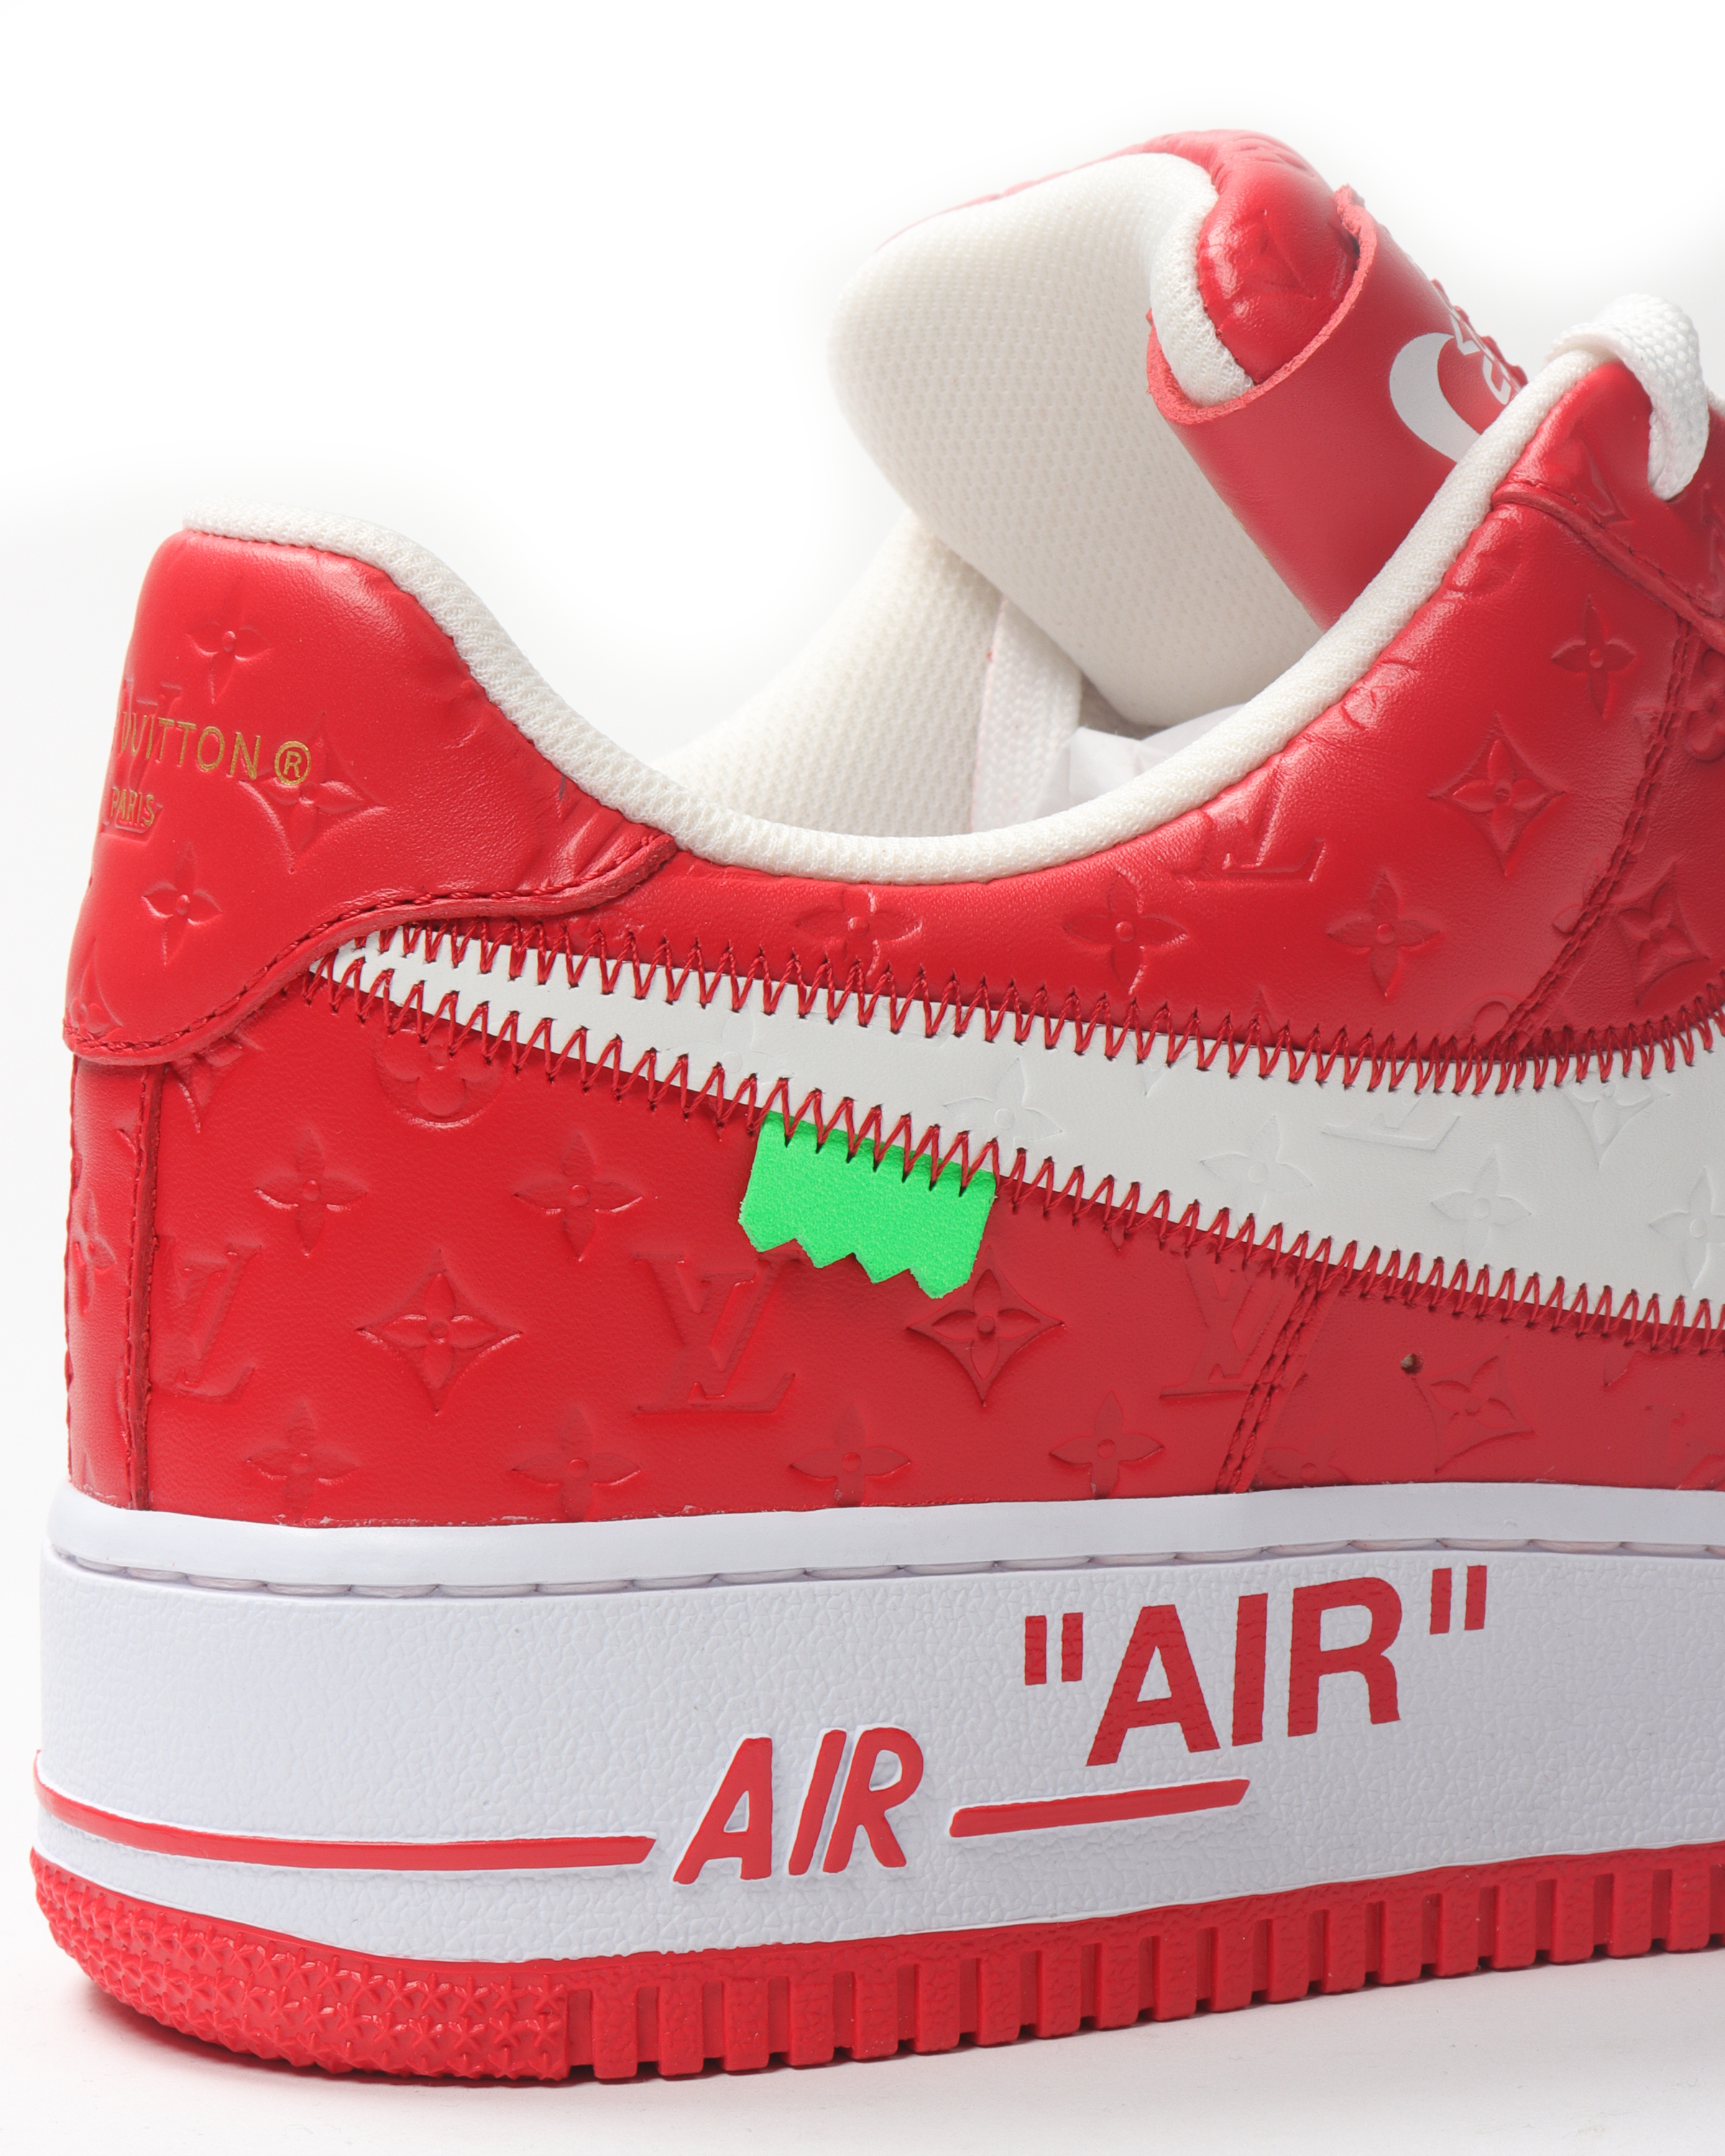 Nike Air Force 1 Louis Vuitton OFF White White/Red Sz 7 New $4500